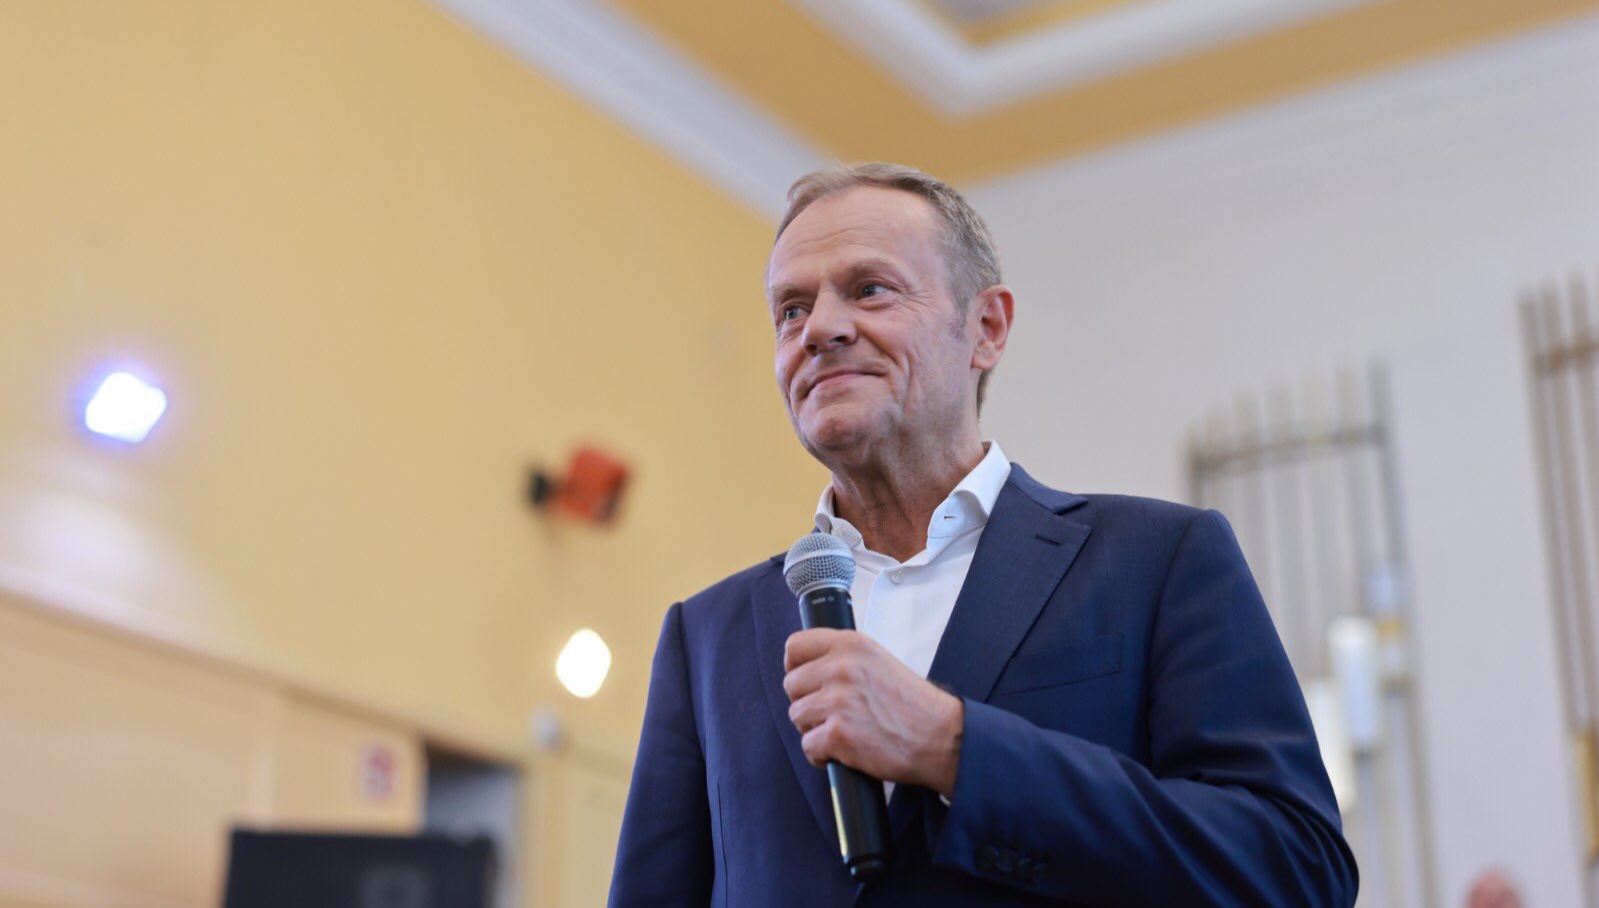 Shocking words of Donald Tusk: “We will restore the legal status quo without legal acts… they will be seen off the building